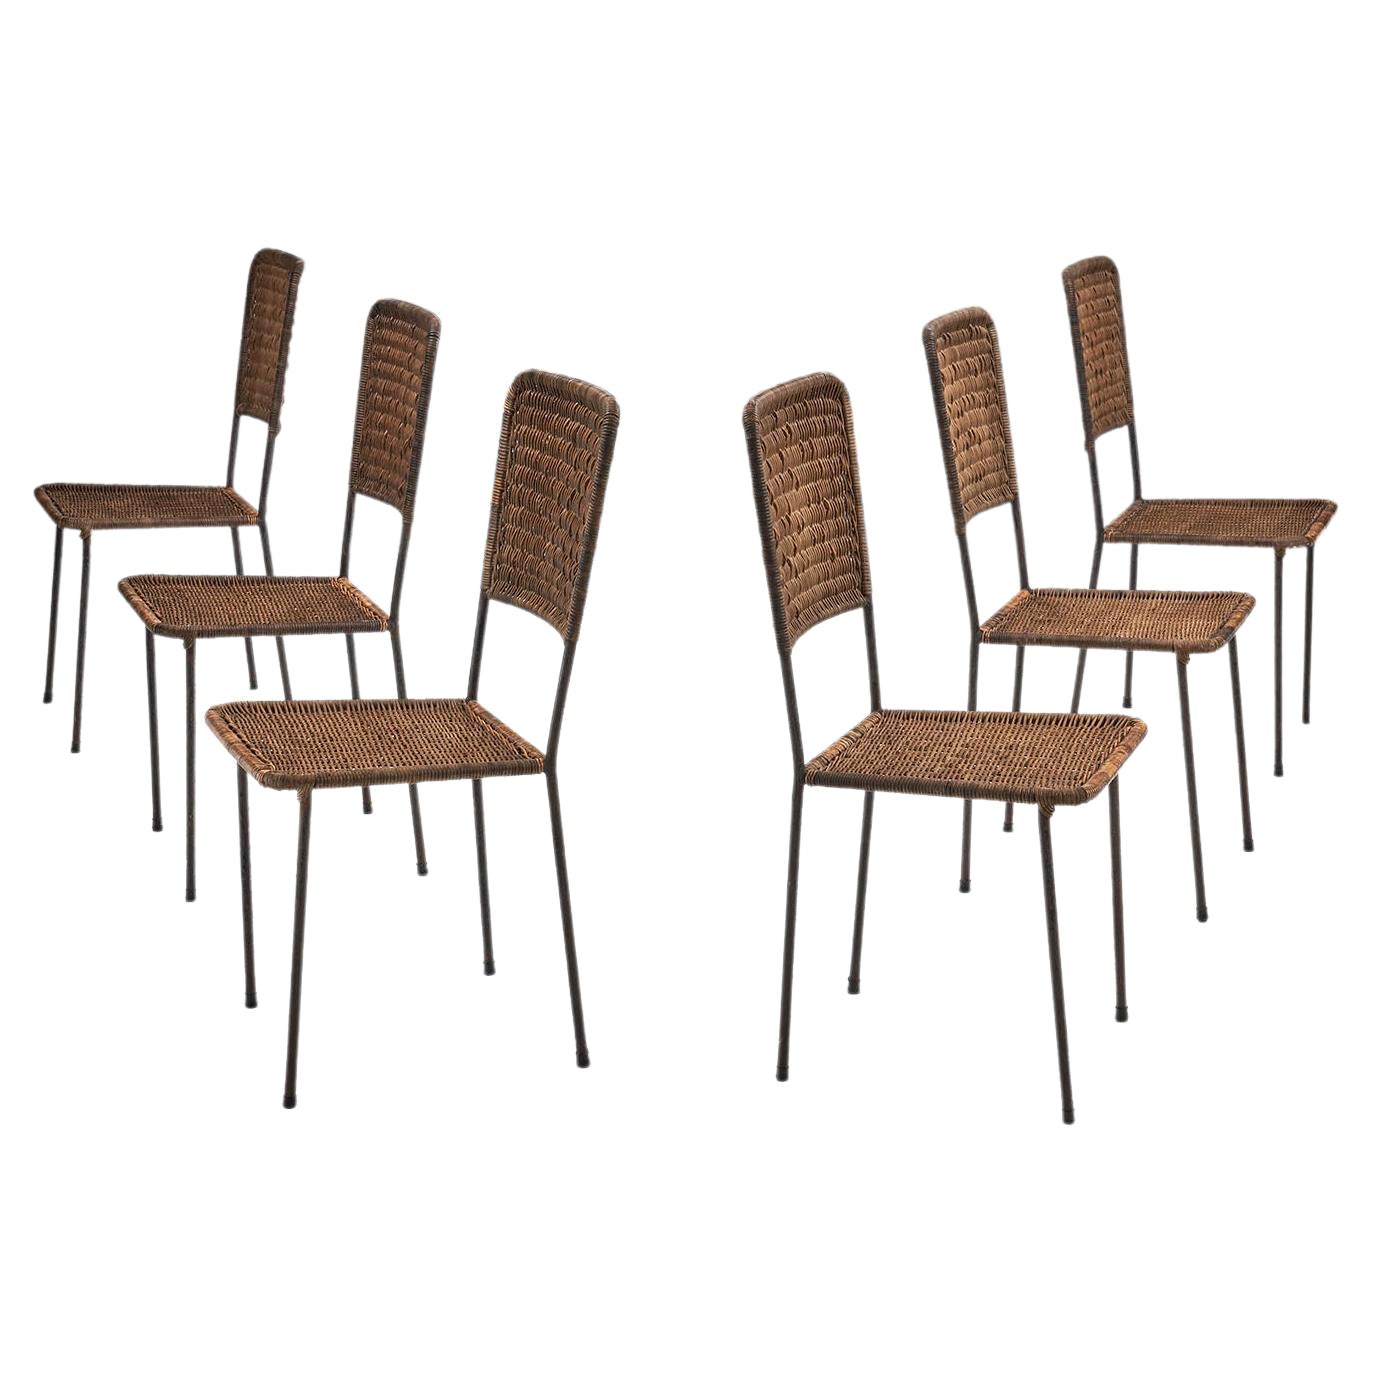 6 Iron and Rattan Chairs, Brazil, 1960s